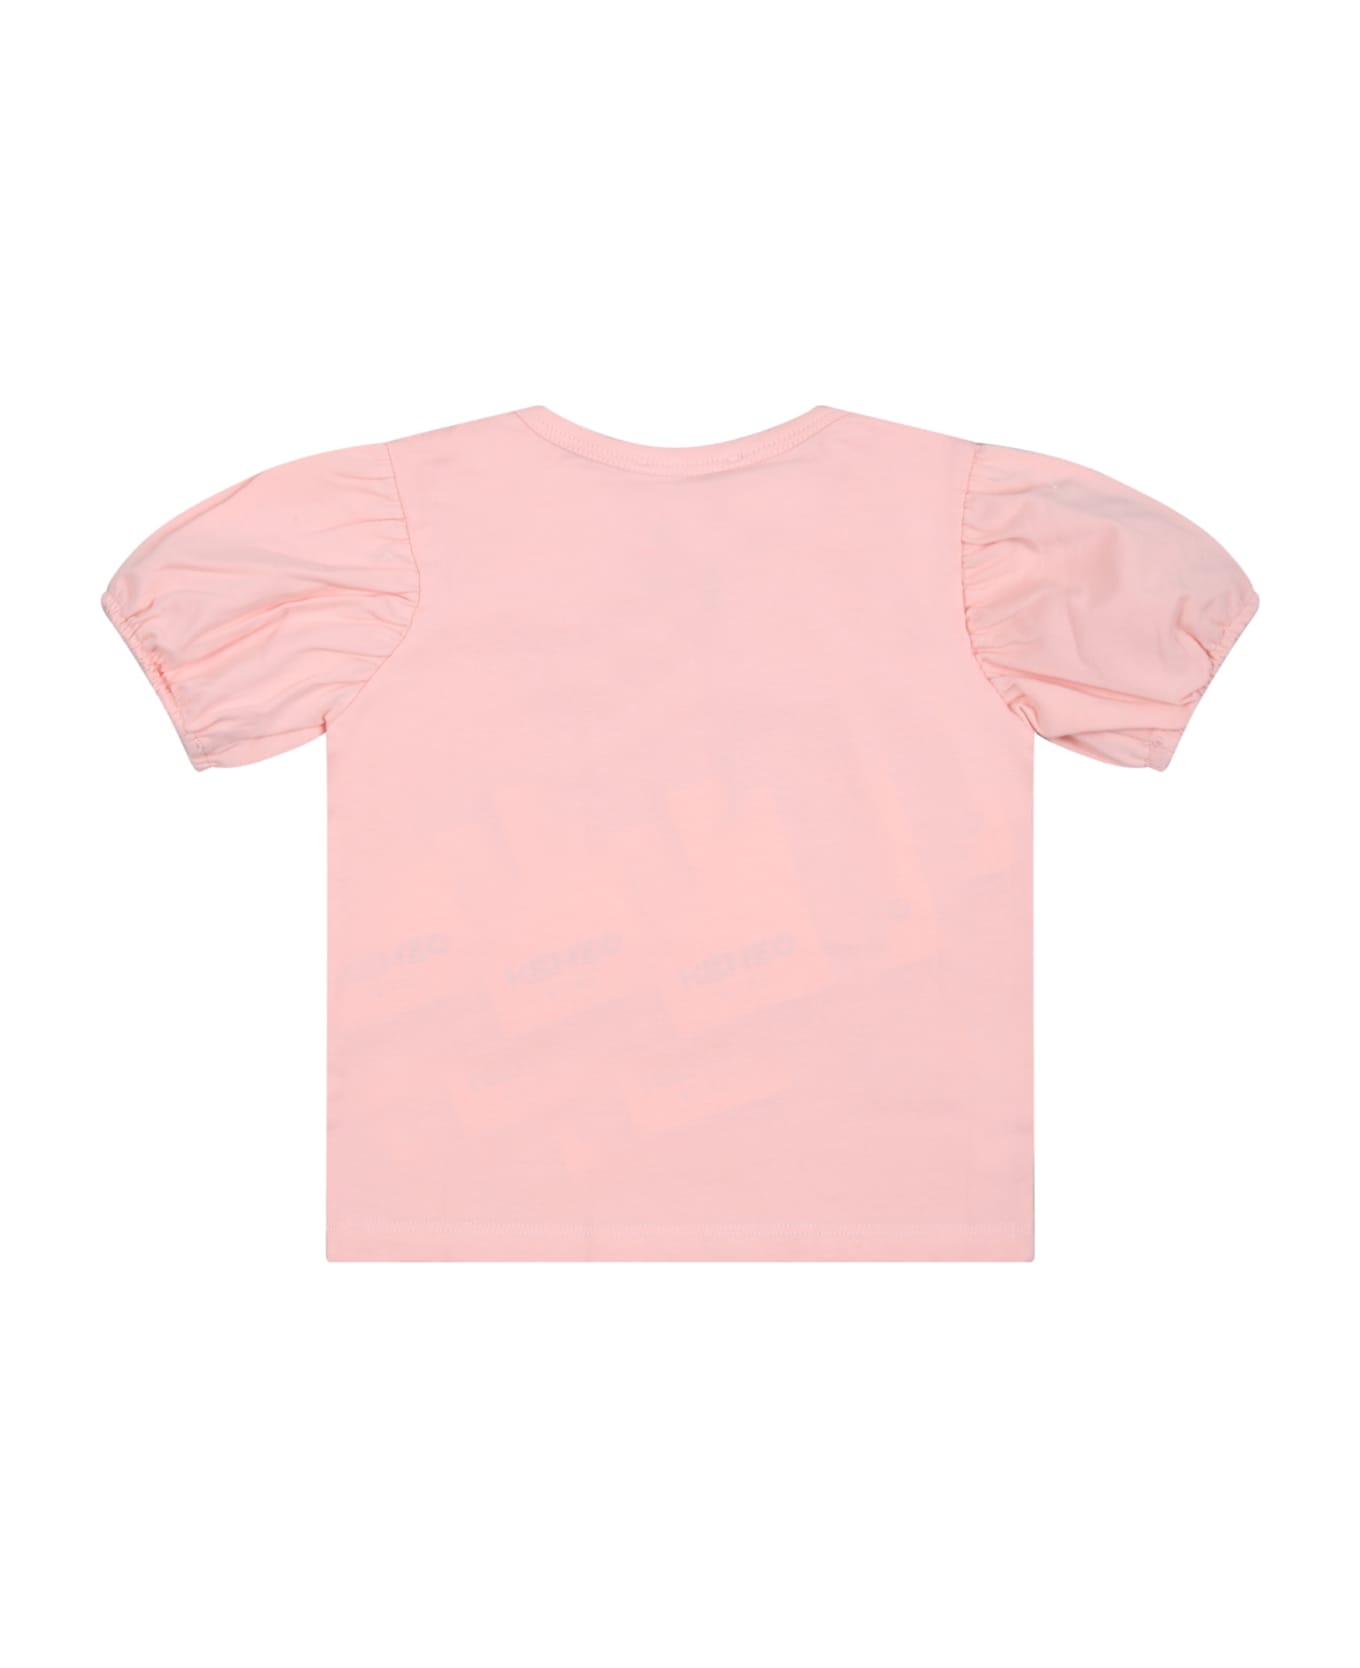 Kenzo Kids Pink T-shirt For Baby Girl With Iconic Roaring Tiger And Logo - Pink